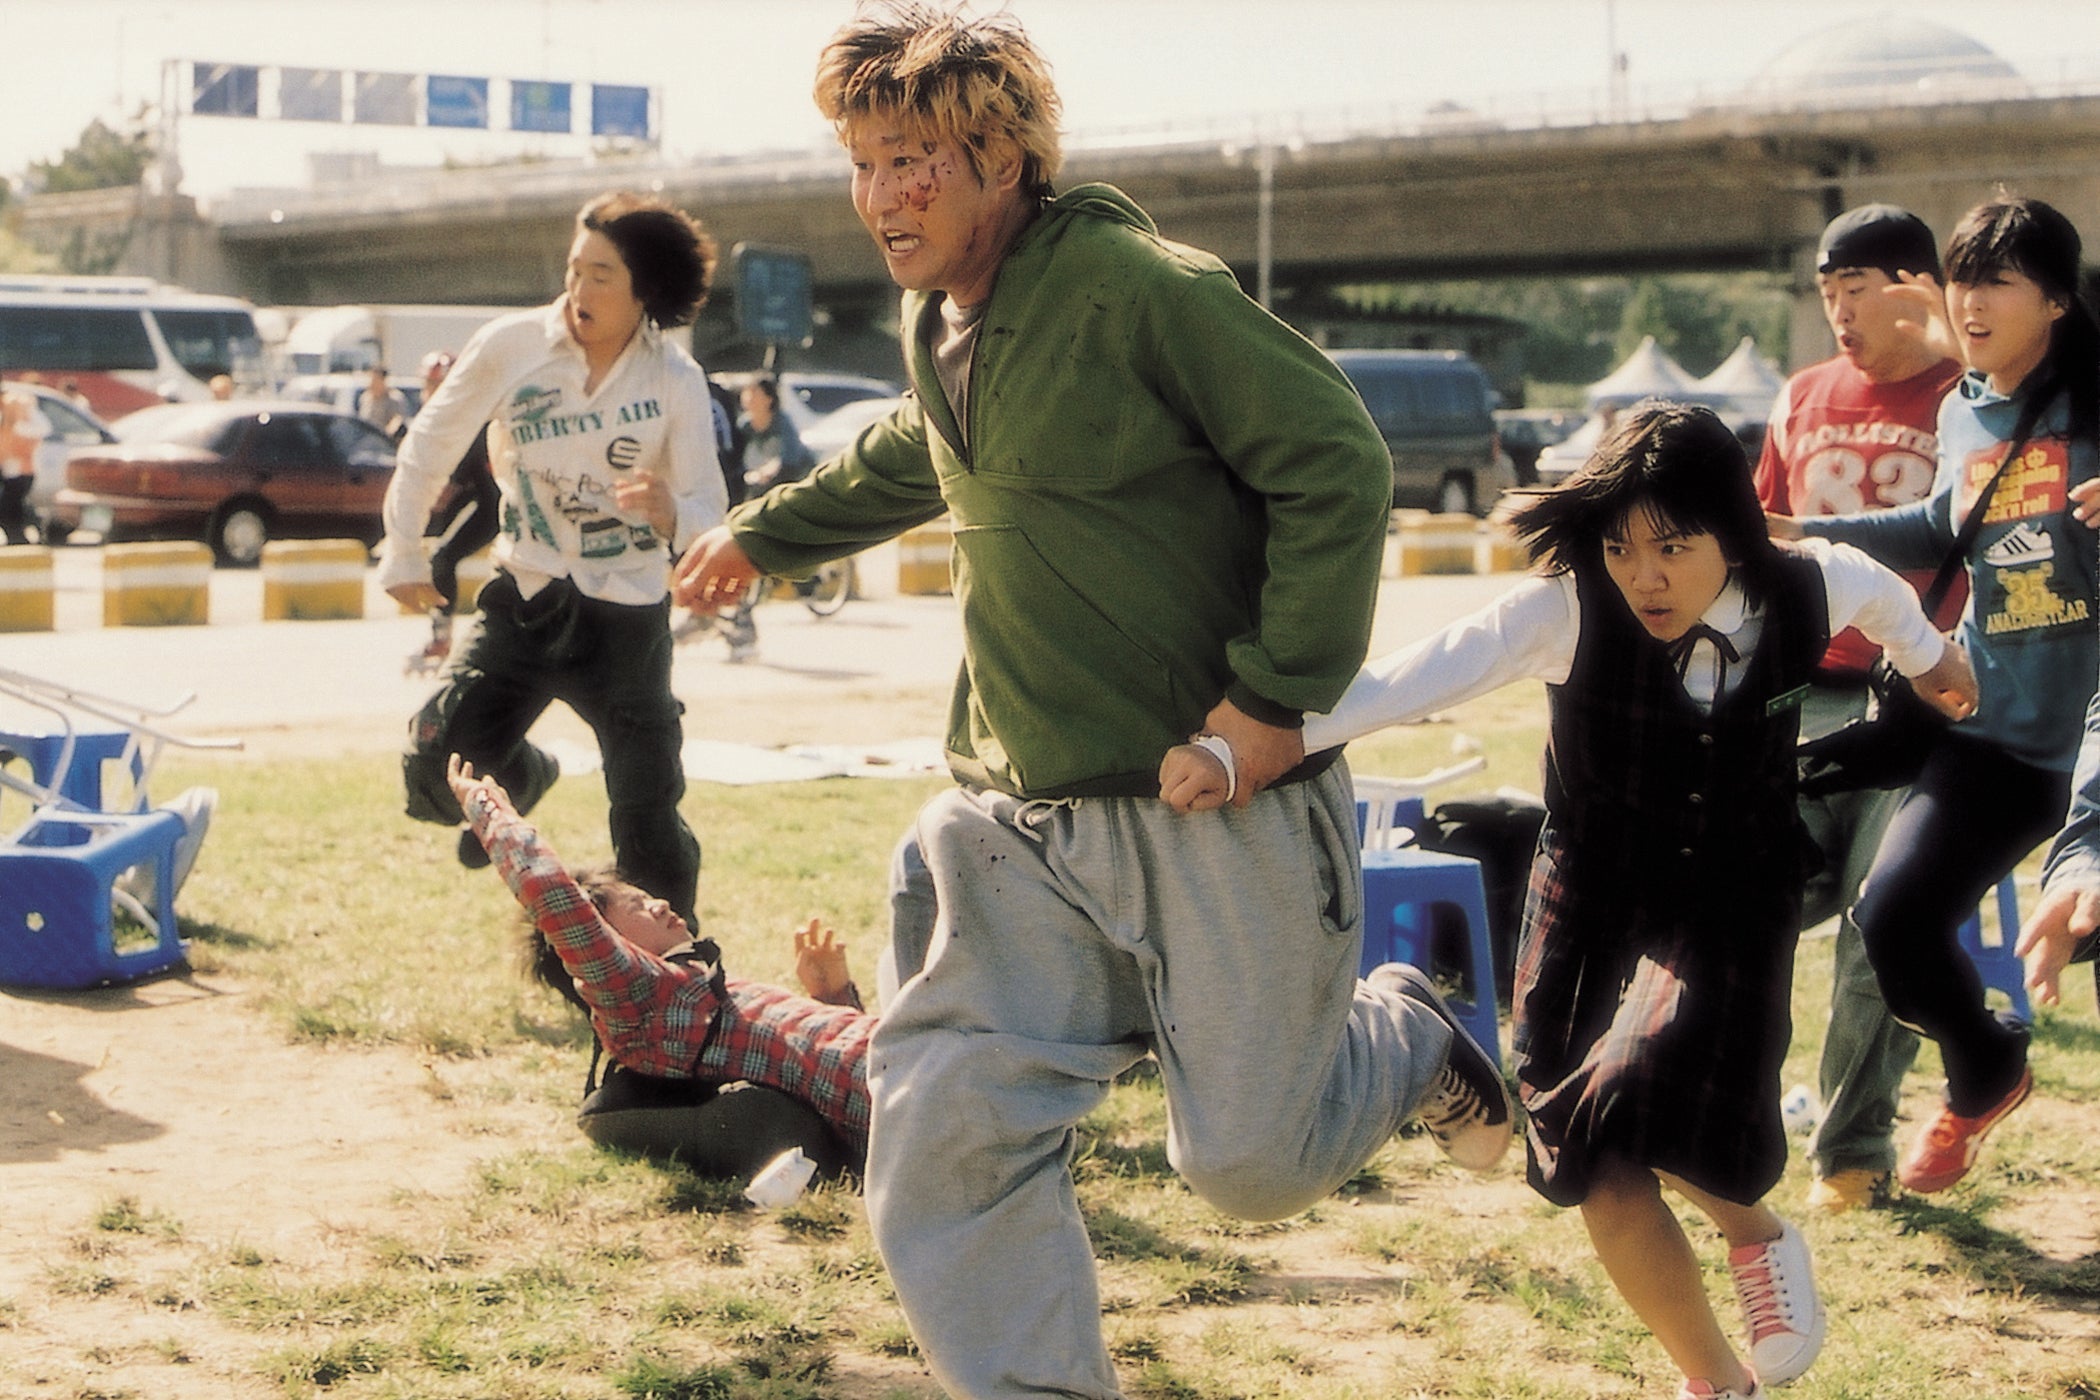 In a scene from The Host, Song Kang-ho, Ko A-sung, and others flee, running in front of a parking lot.